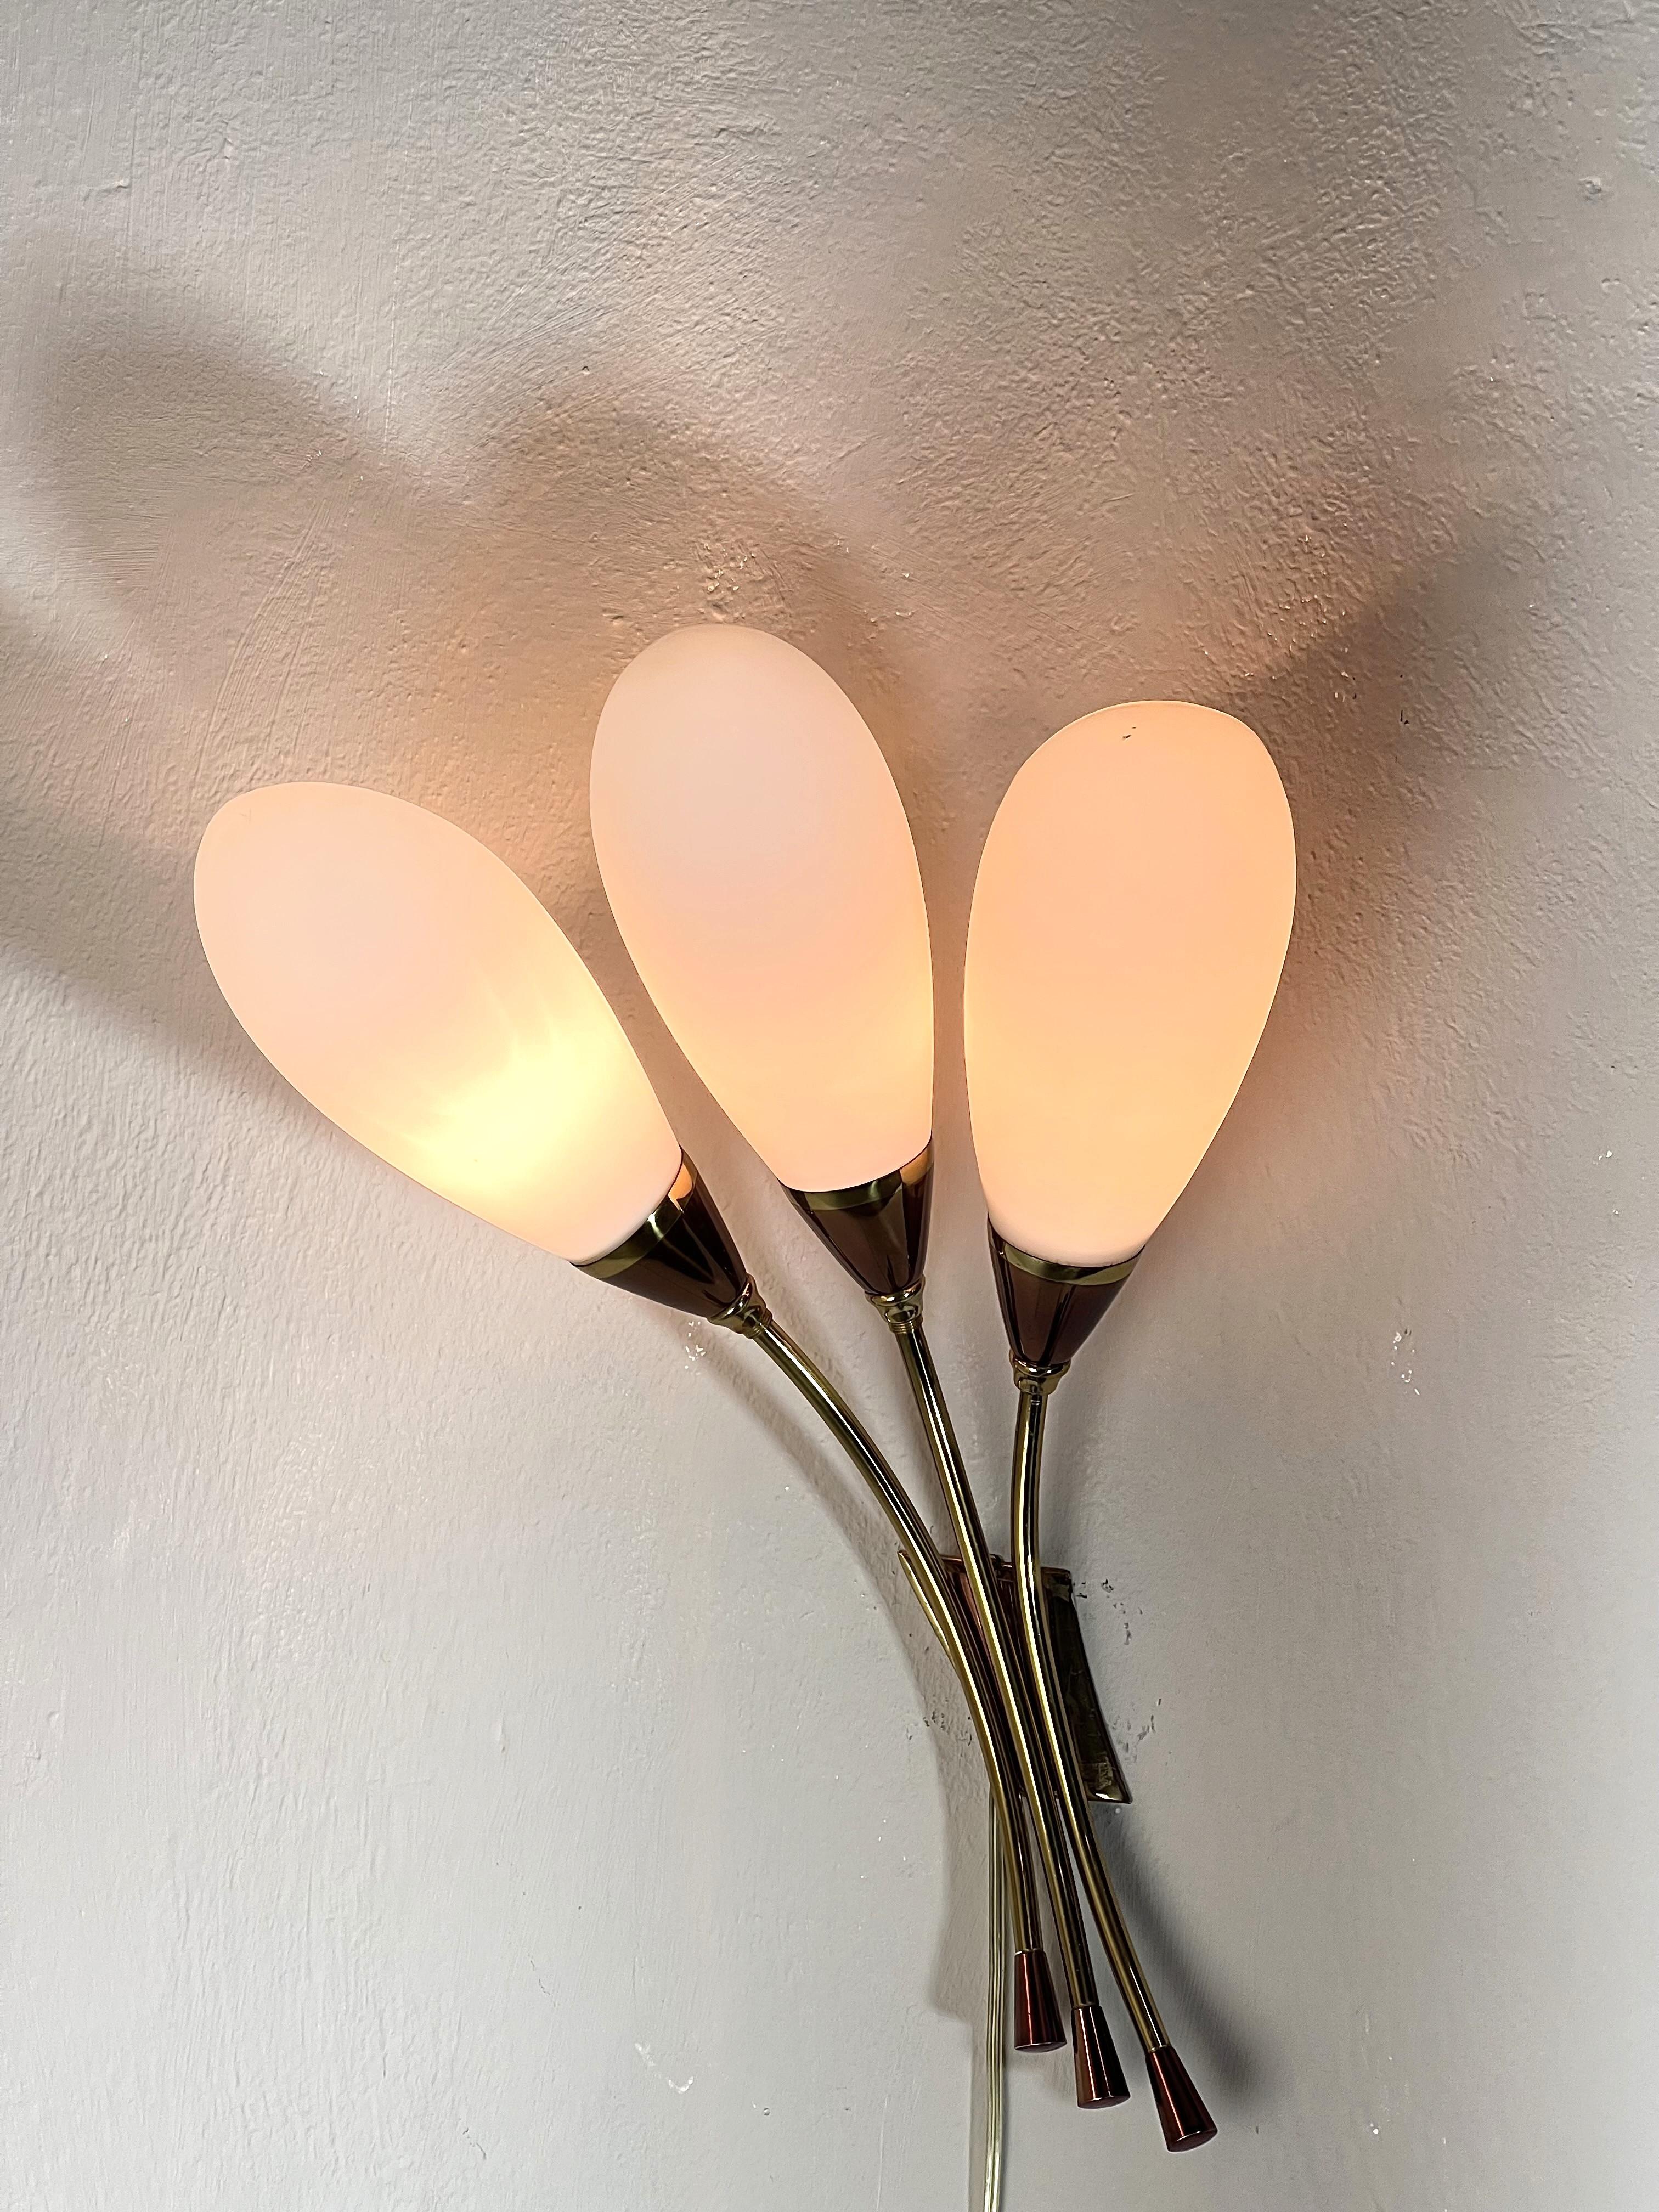 20th Century Pair of Wall Lights Sconces Brass Opaline Glass Midcentury Modern Italy 1960s